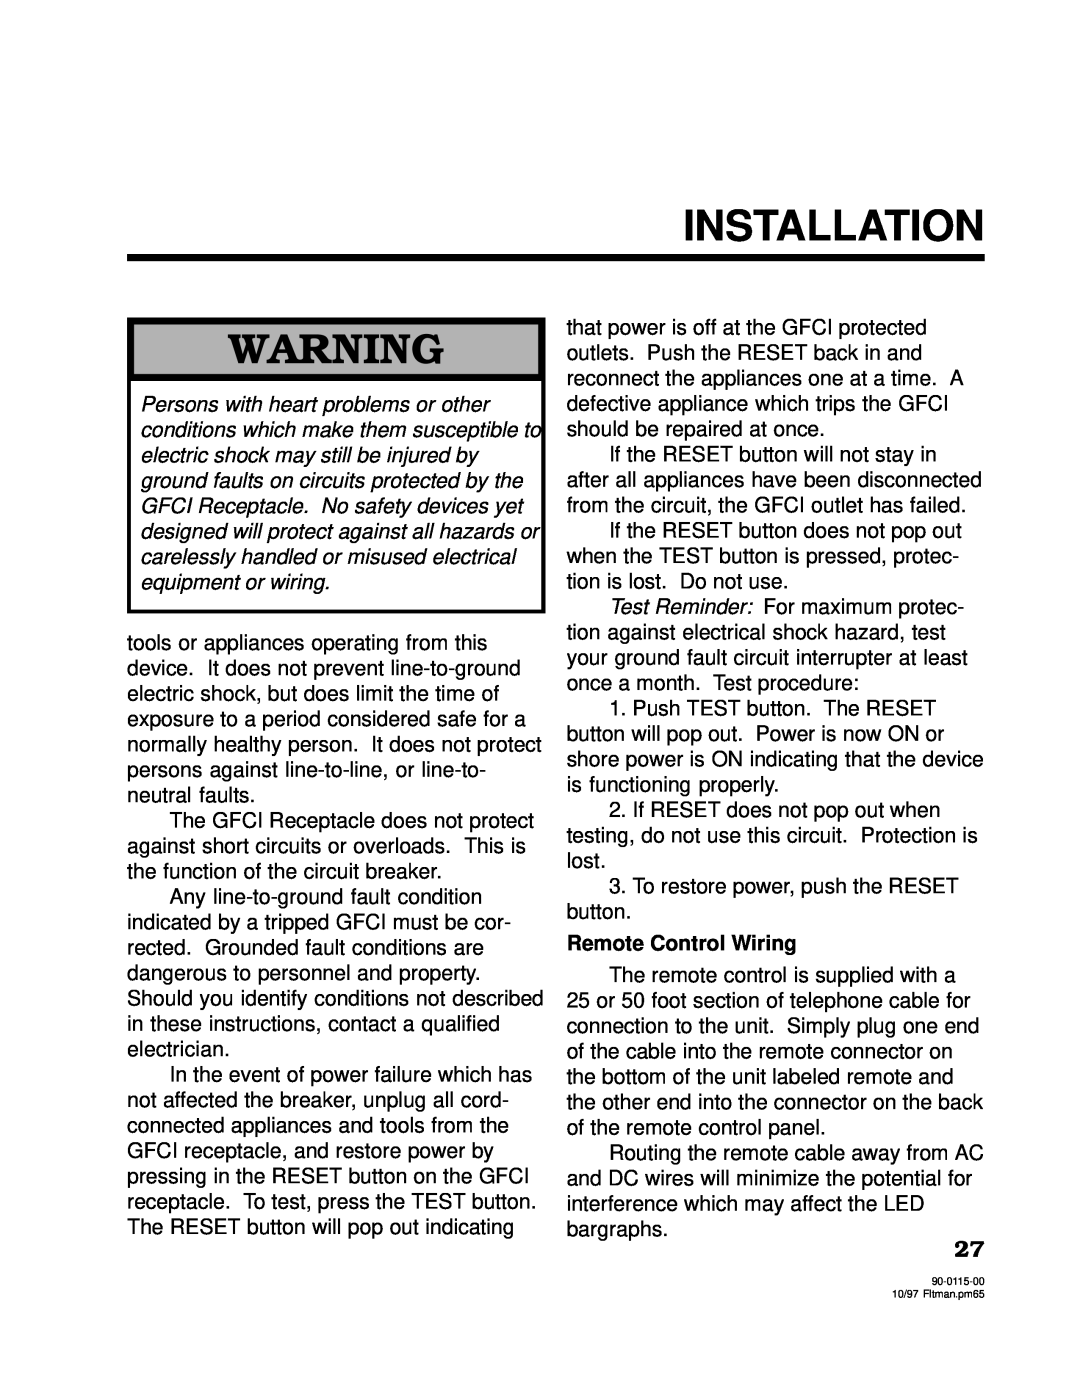 Xantrex Technology 2000, 2500 owner manual Installation, To restore power, push the RESET button 